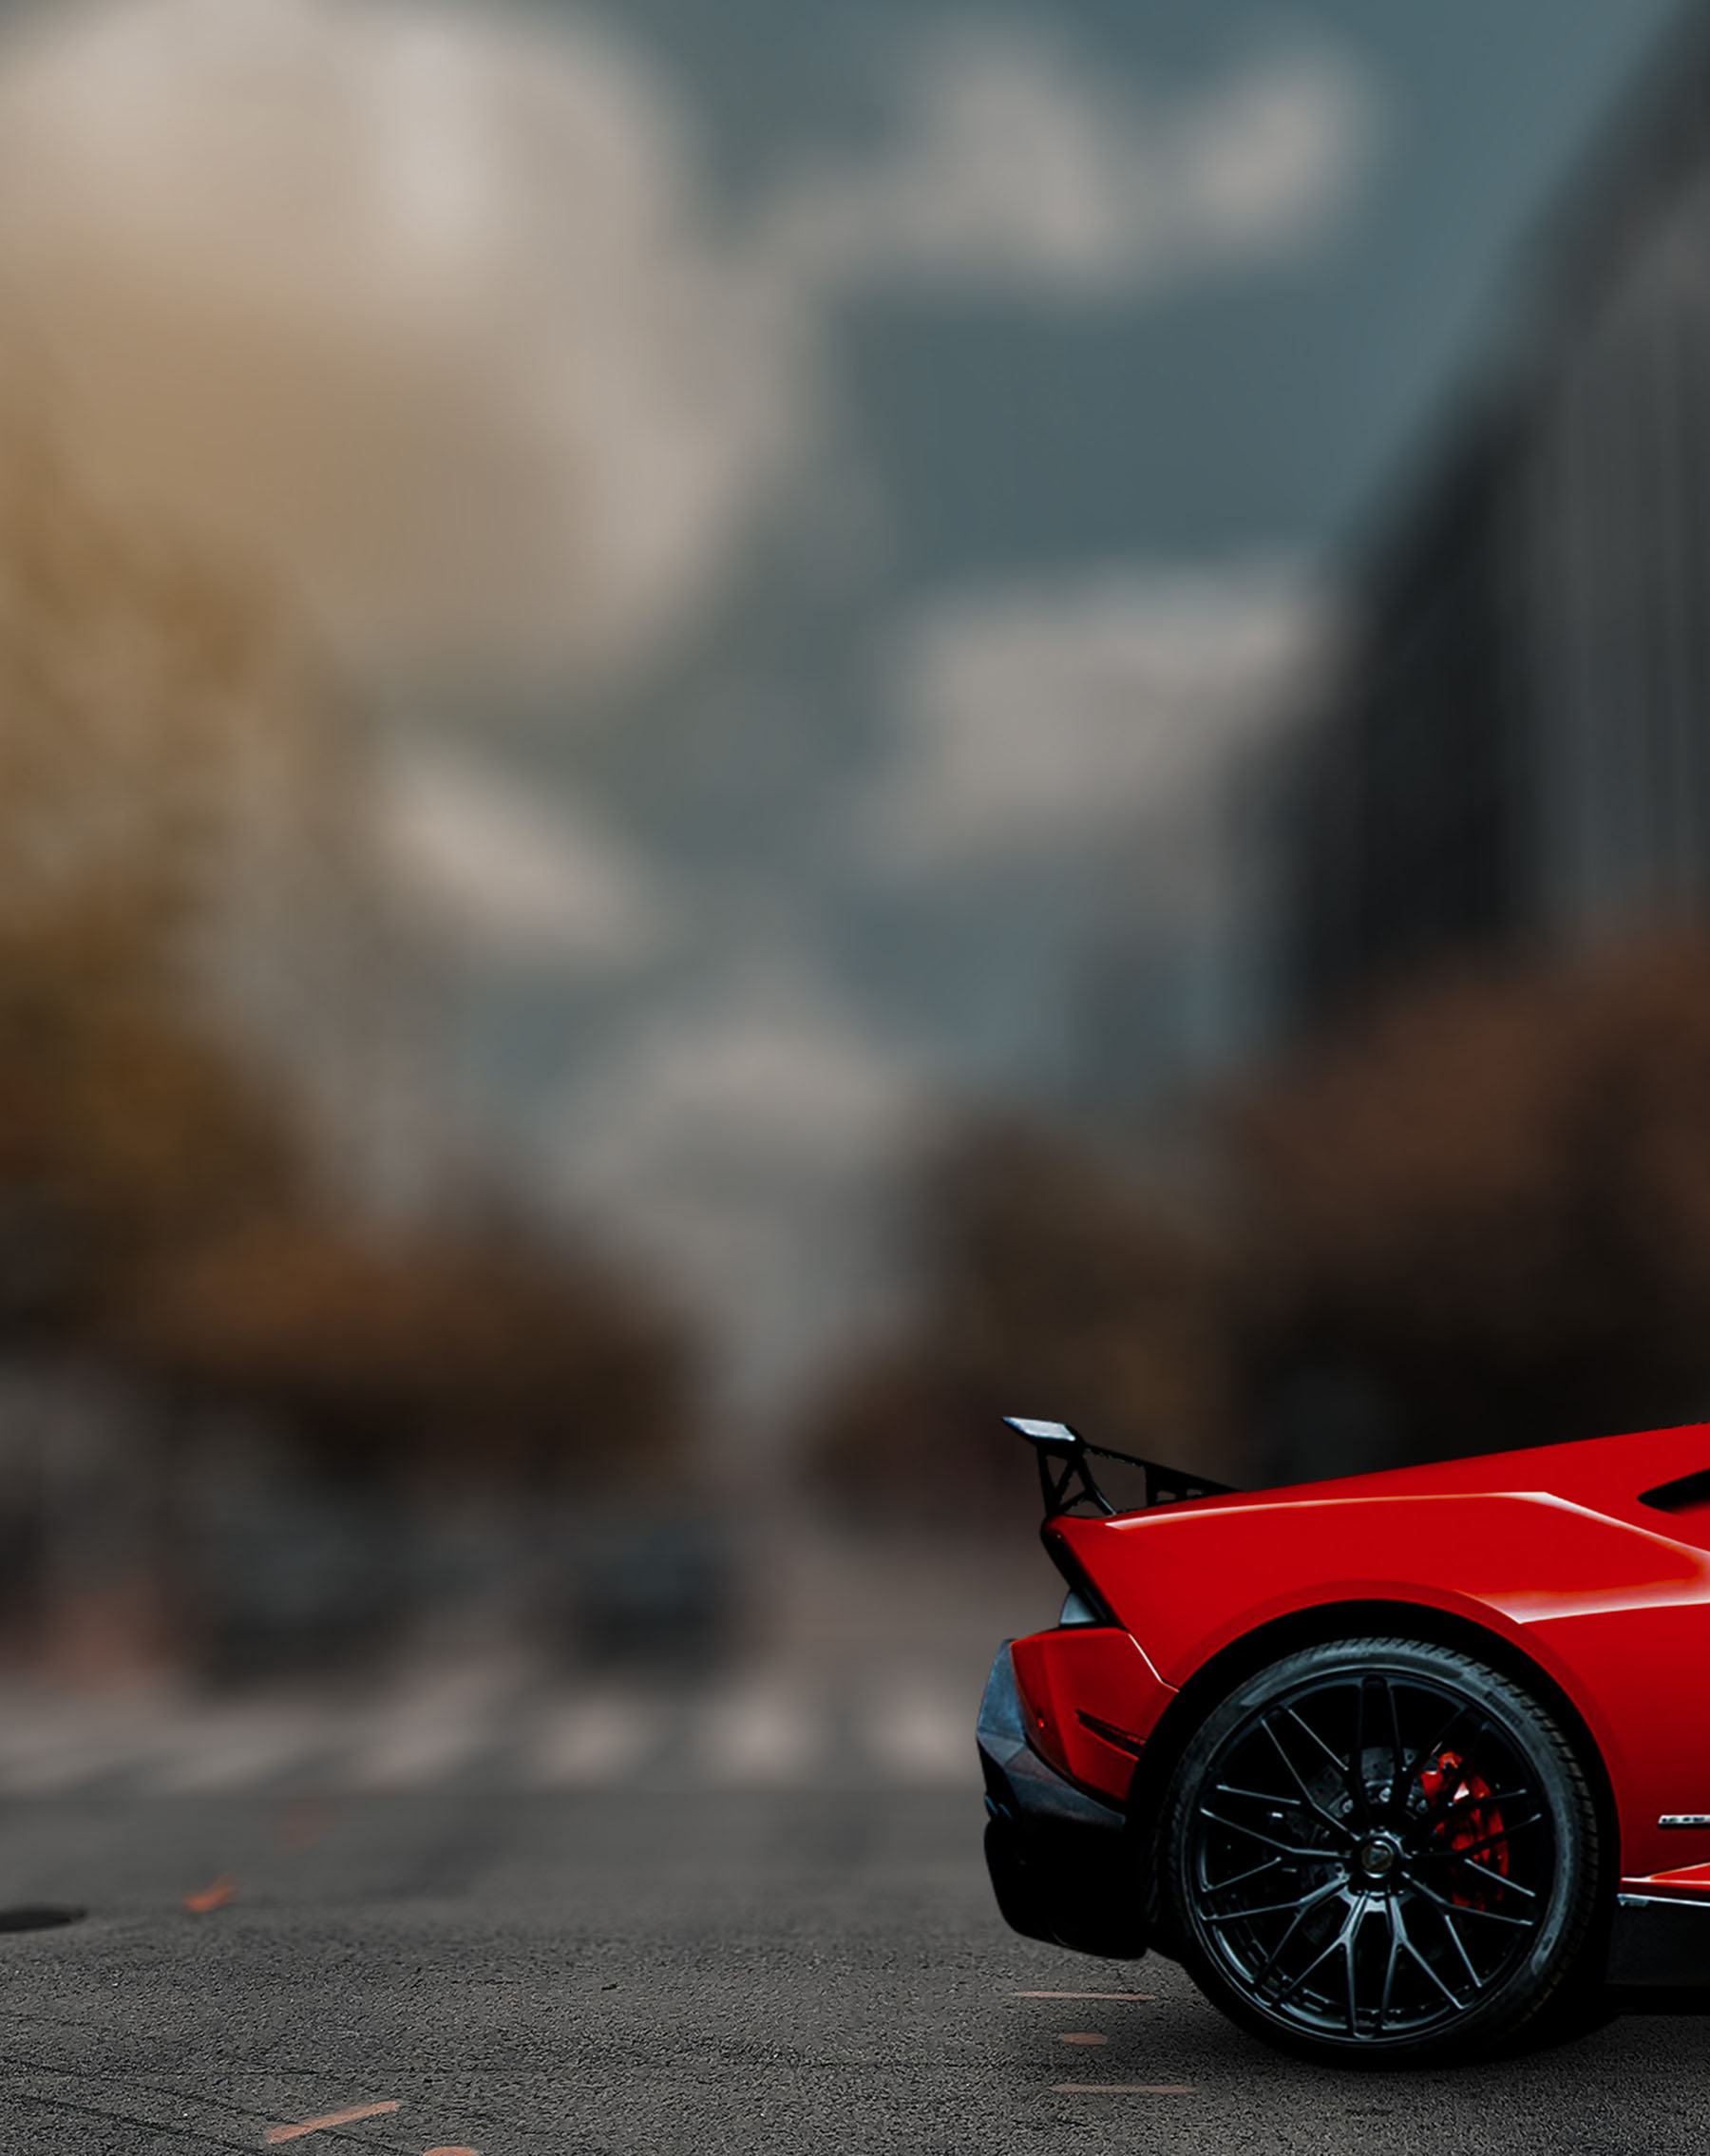 Red Car CB Blur Background Free Stock Image [ Download ]